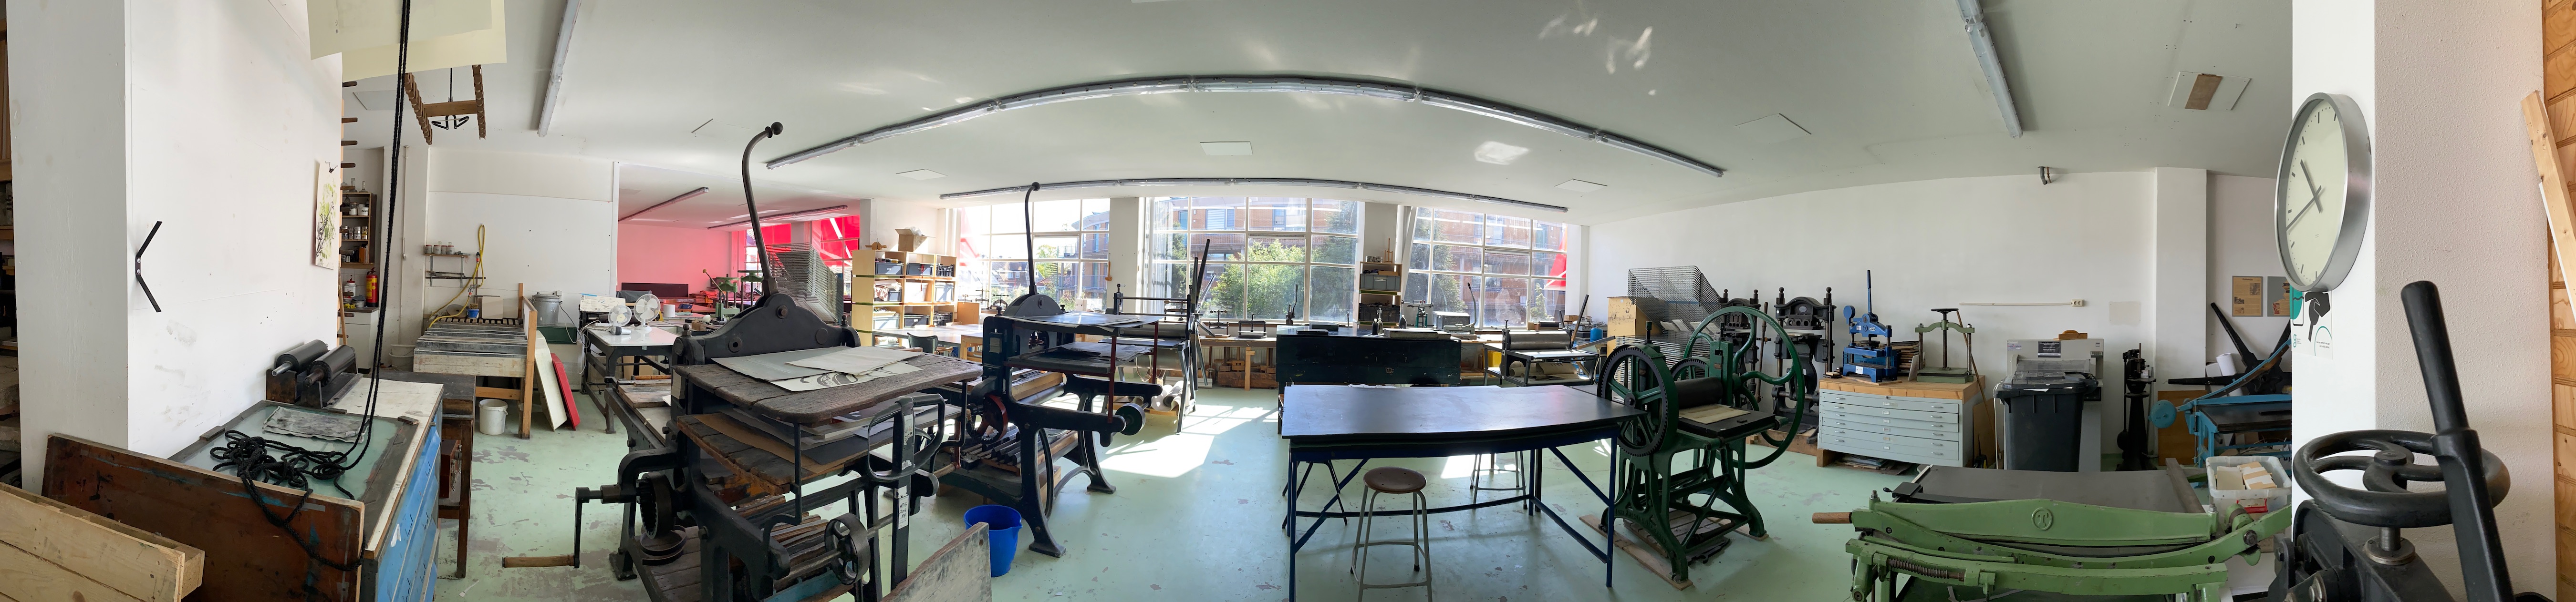 Panoramic landscape of one of the rooms in the printing workshop.